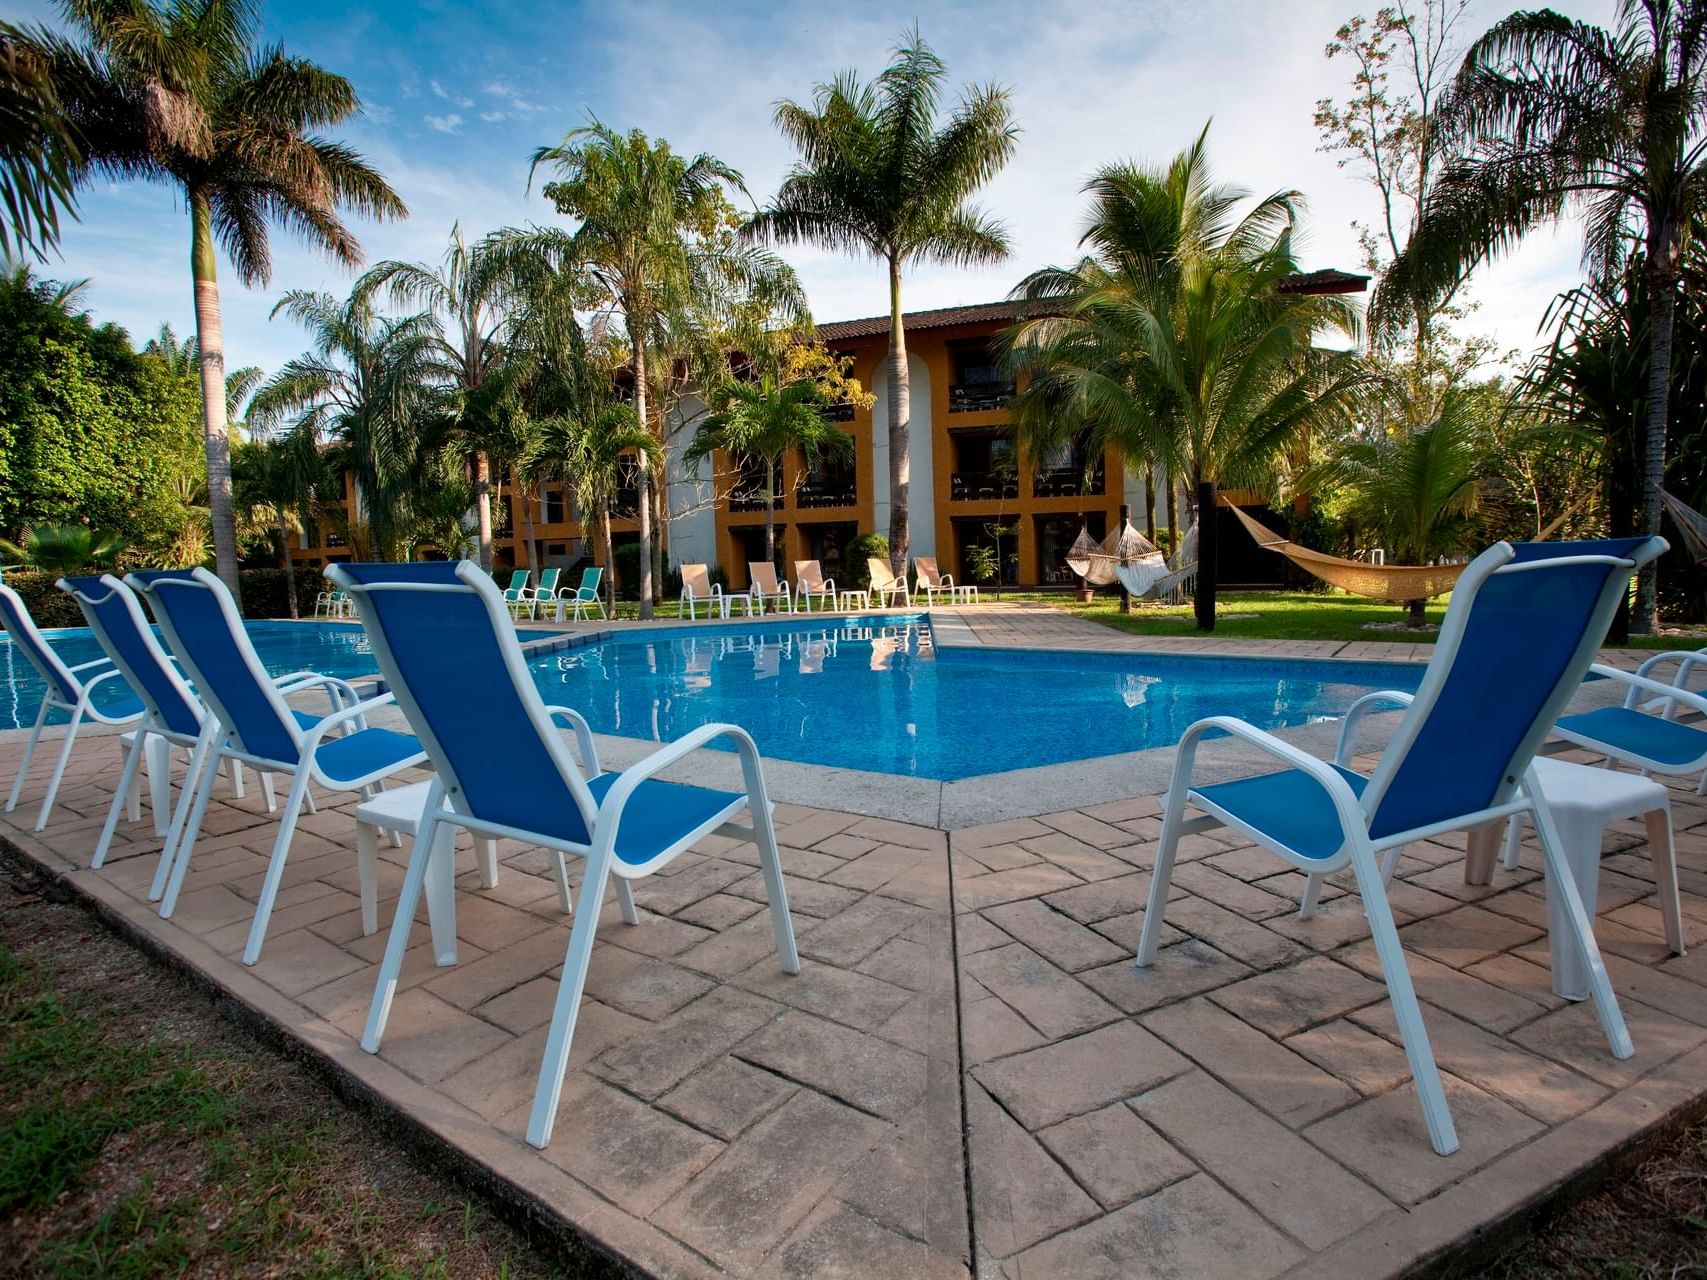 Sunbeds by the outdoor pool at Ciudad Real Palenque